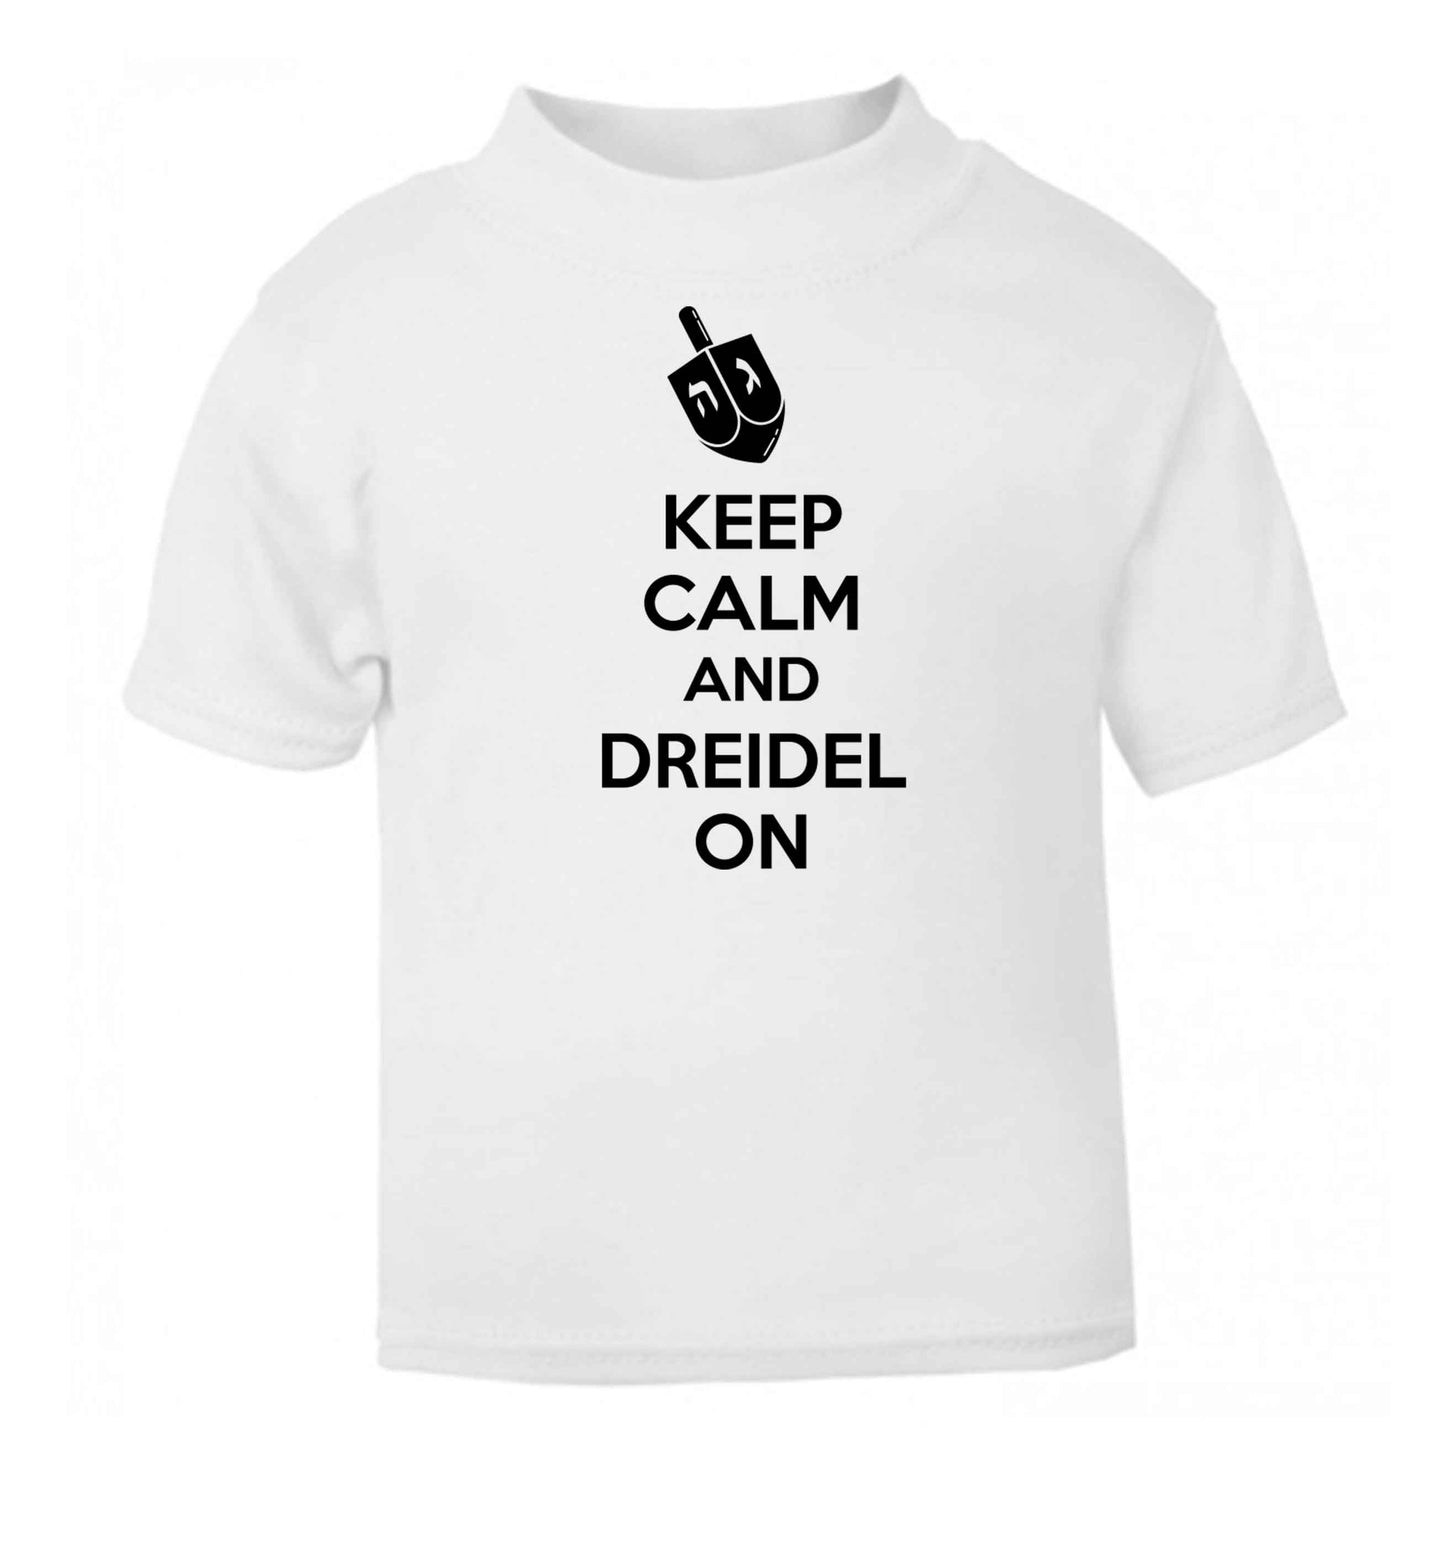 Keep calm and dreidel on white baby toddler Tshirt 2 Years